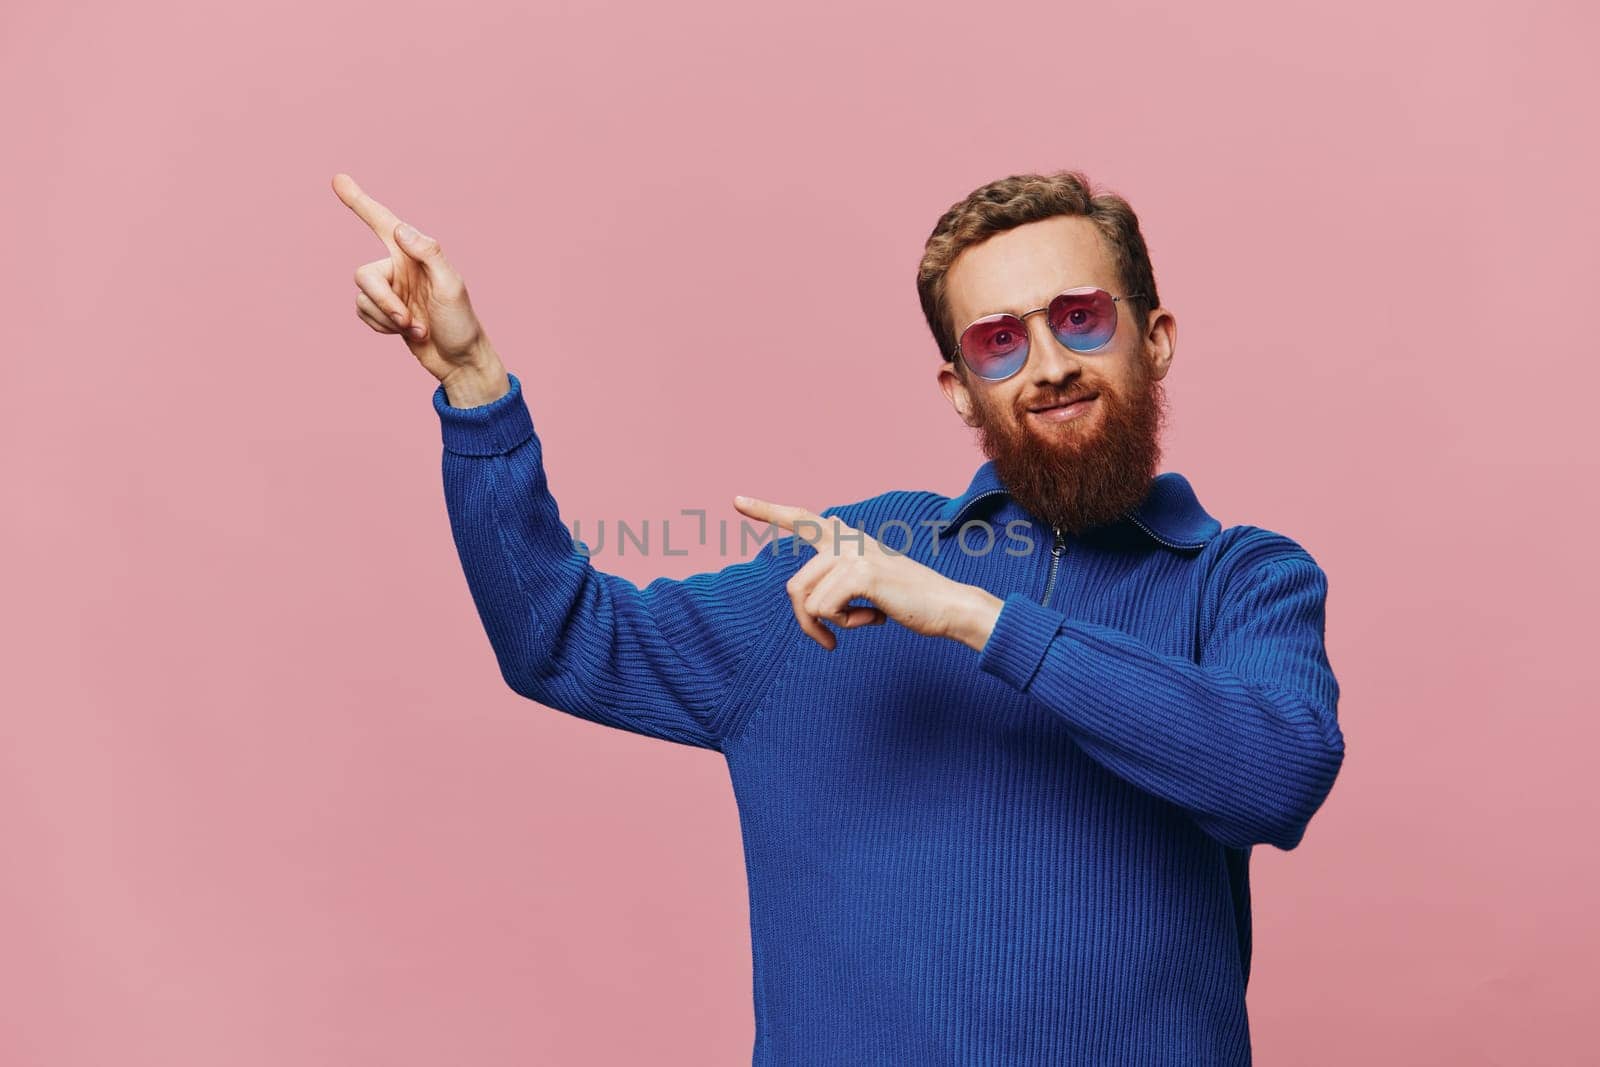 Portrait of a redheaded man wearing sunglasses smiling and dancing, listening to music on a pink background. Hipster with a beard, happiness finger pointing. High quality photo